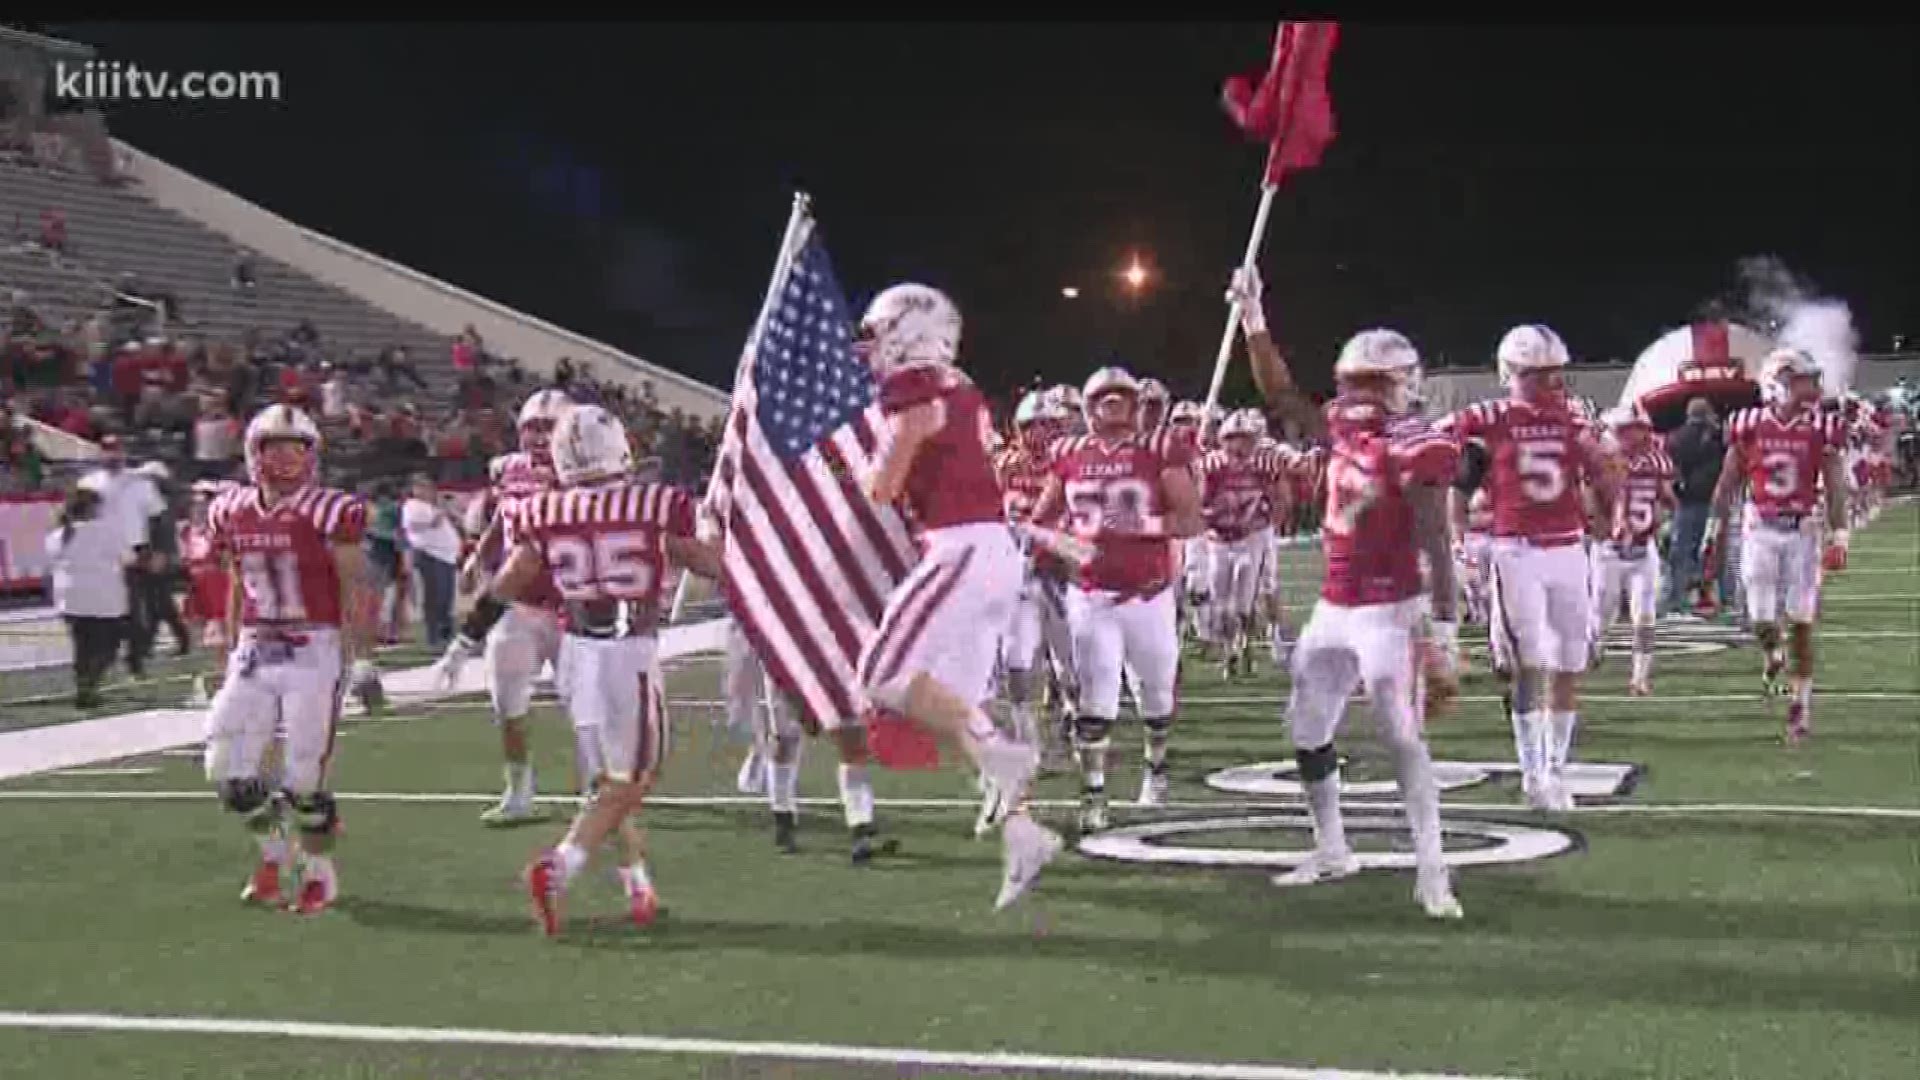 The Ray Texans finished off their season strong winning three consecutive games which propelled them into the playoffs.